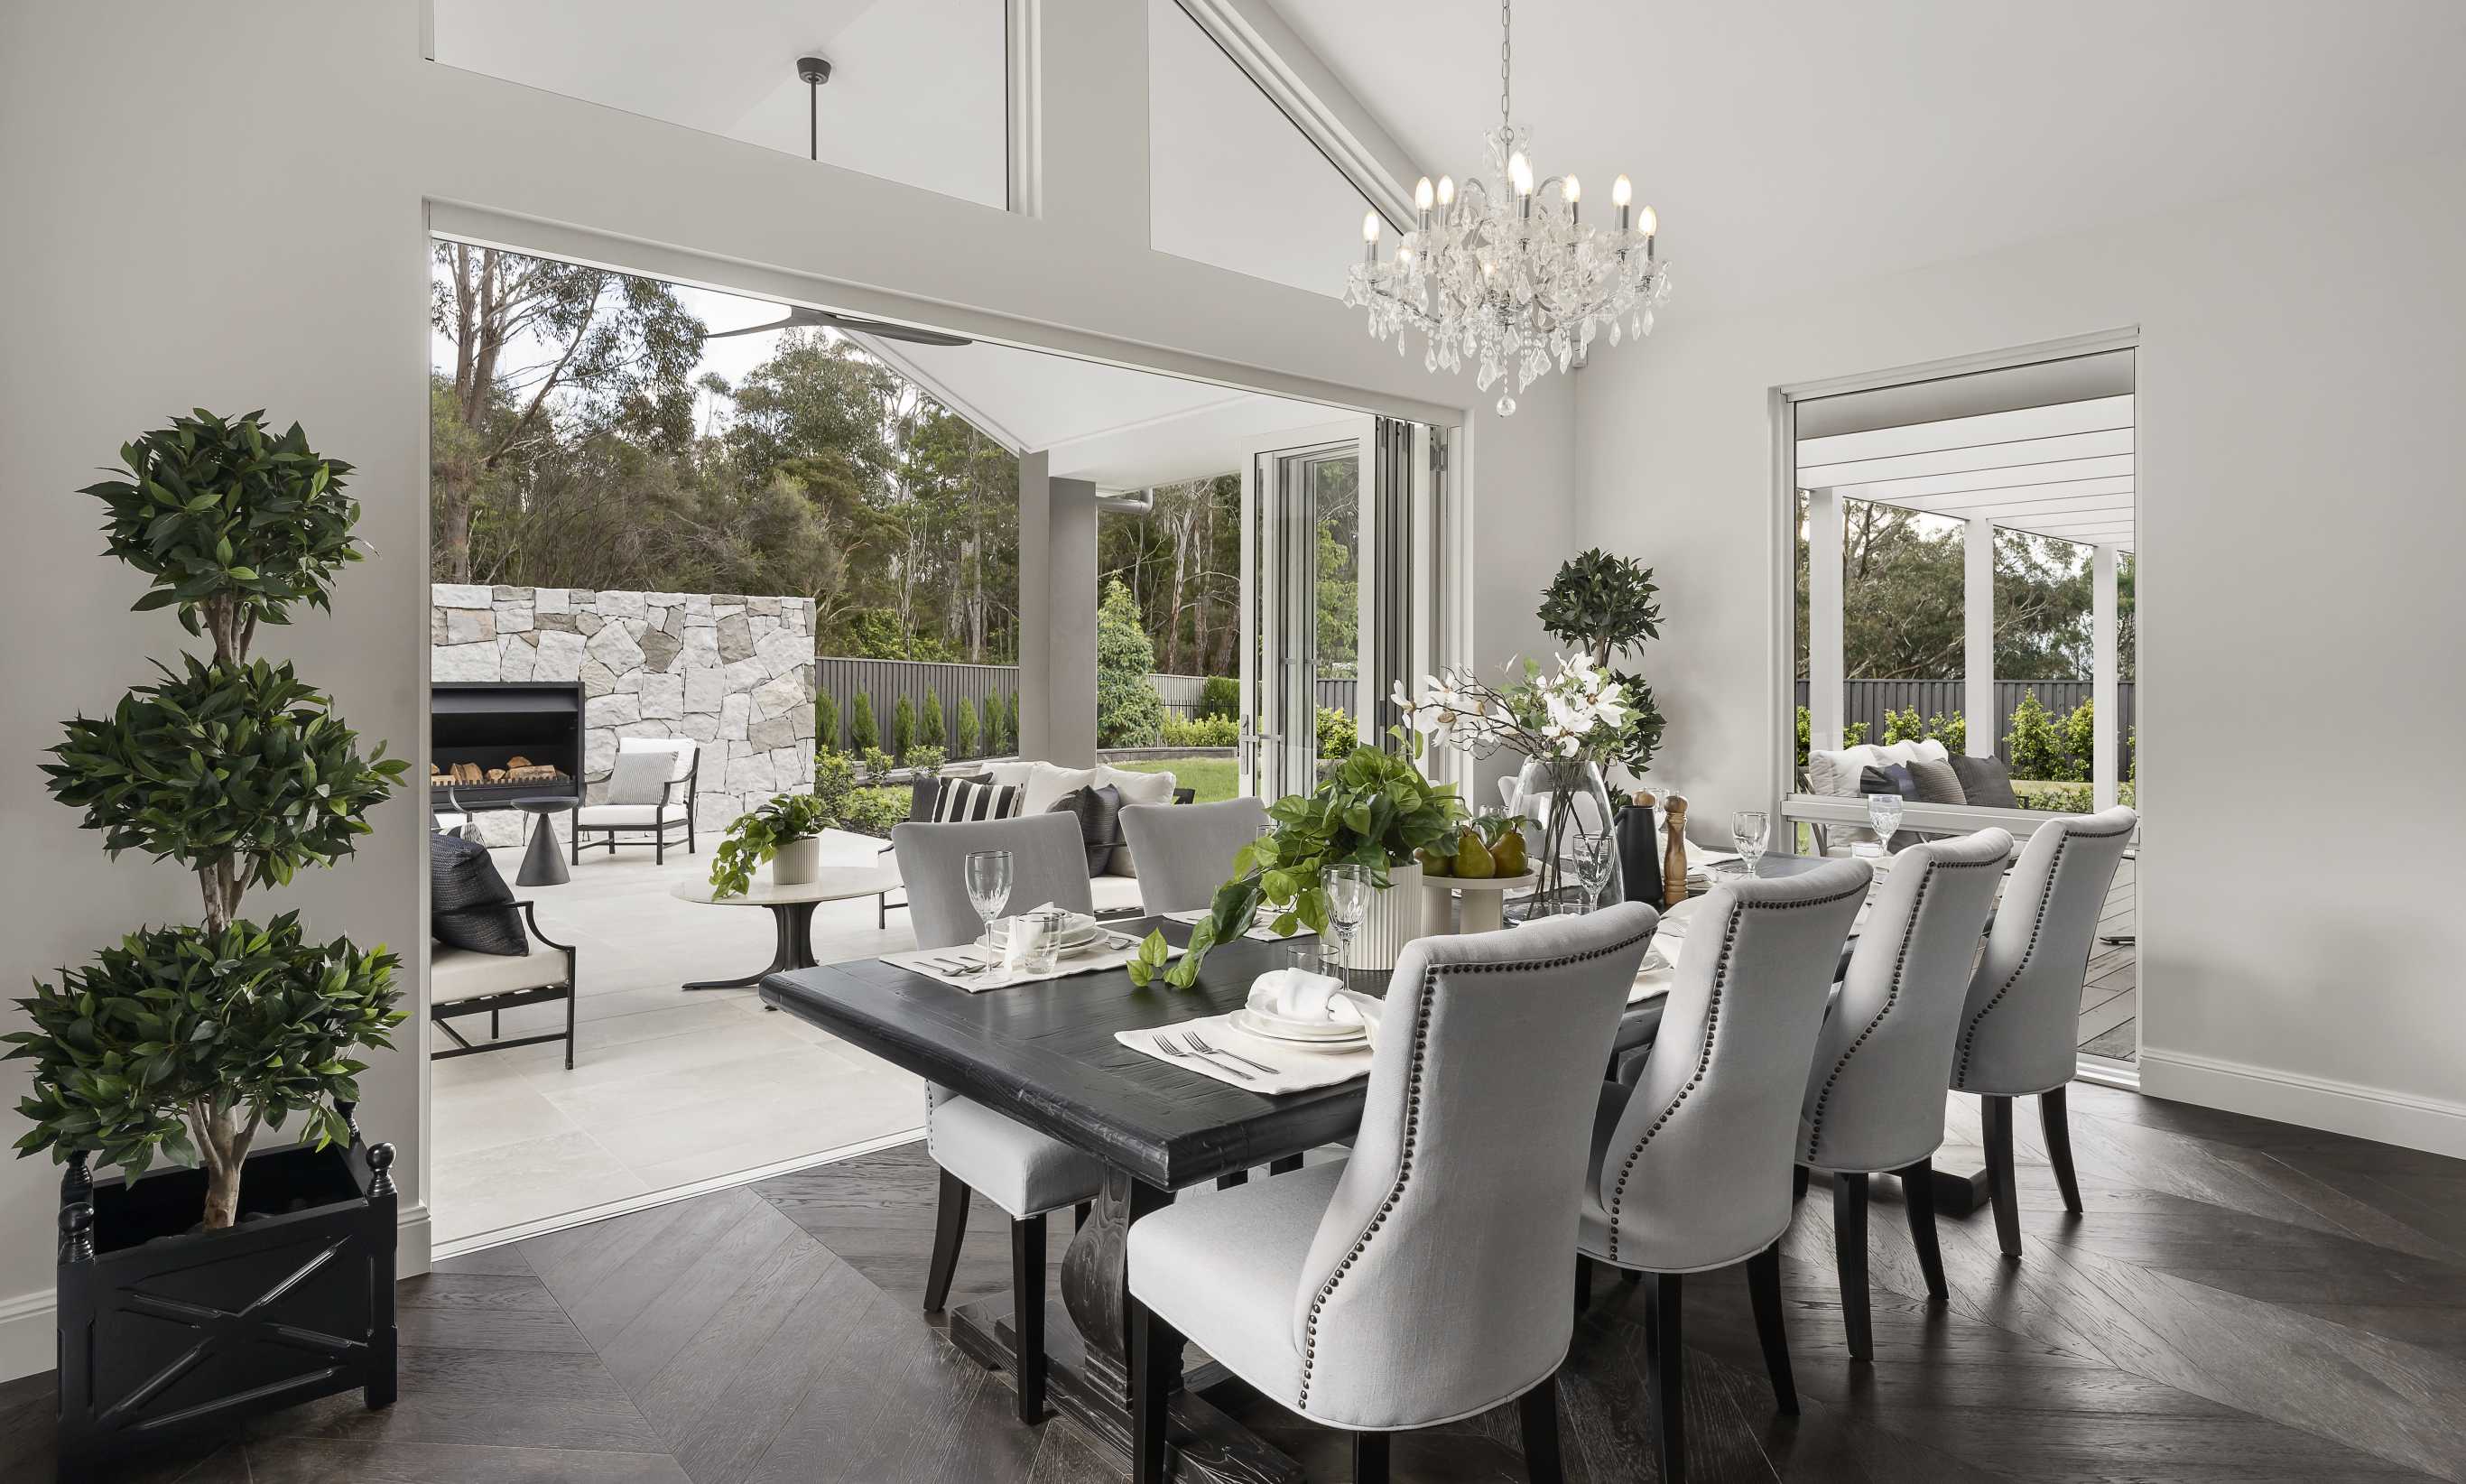 Architectural new home designs in NSW and ACT